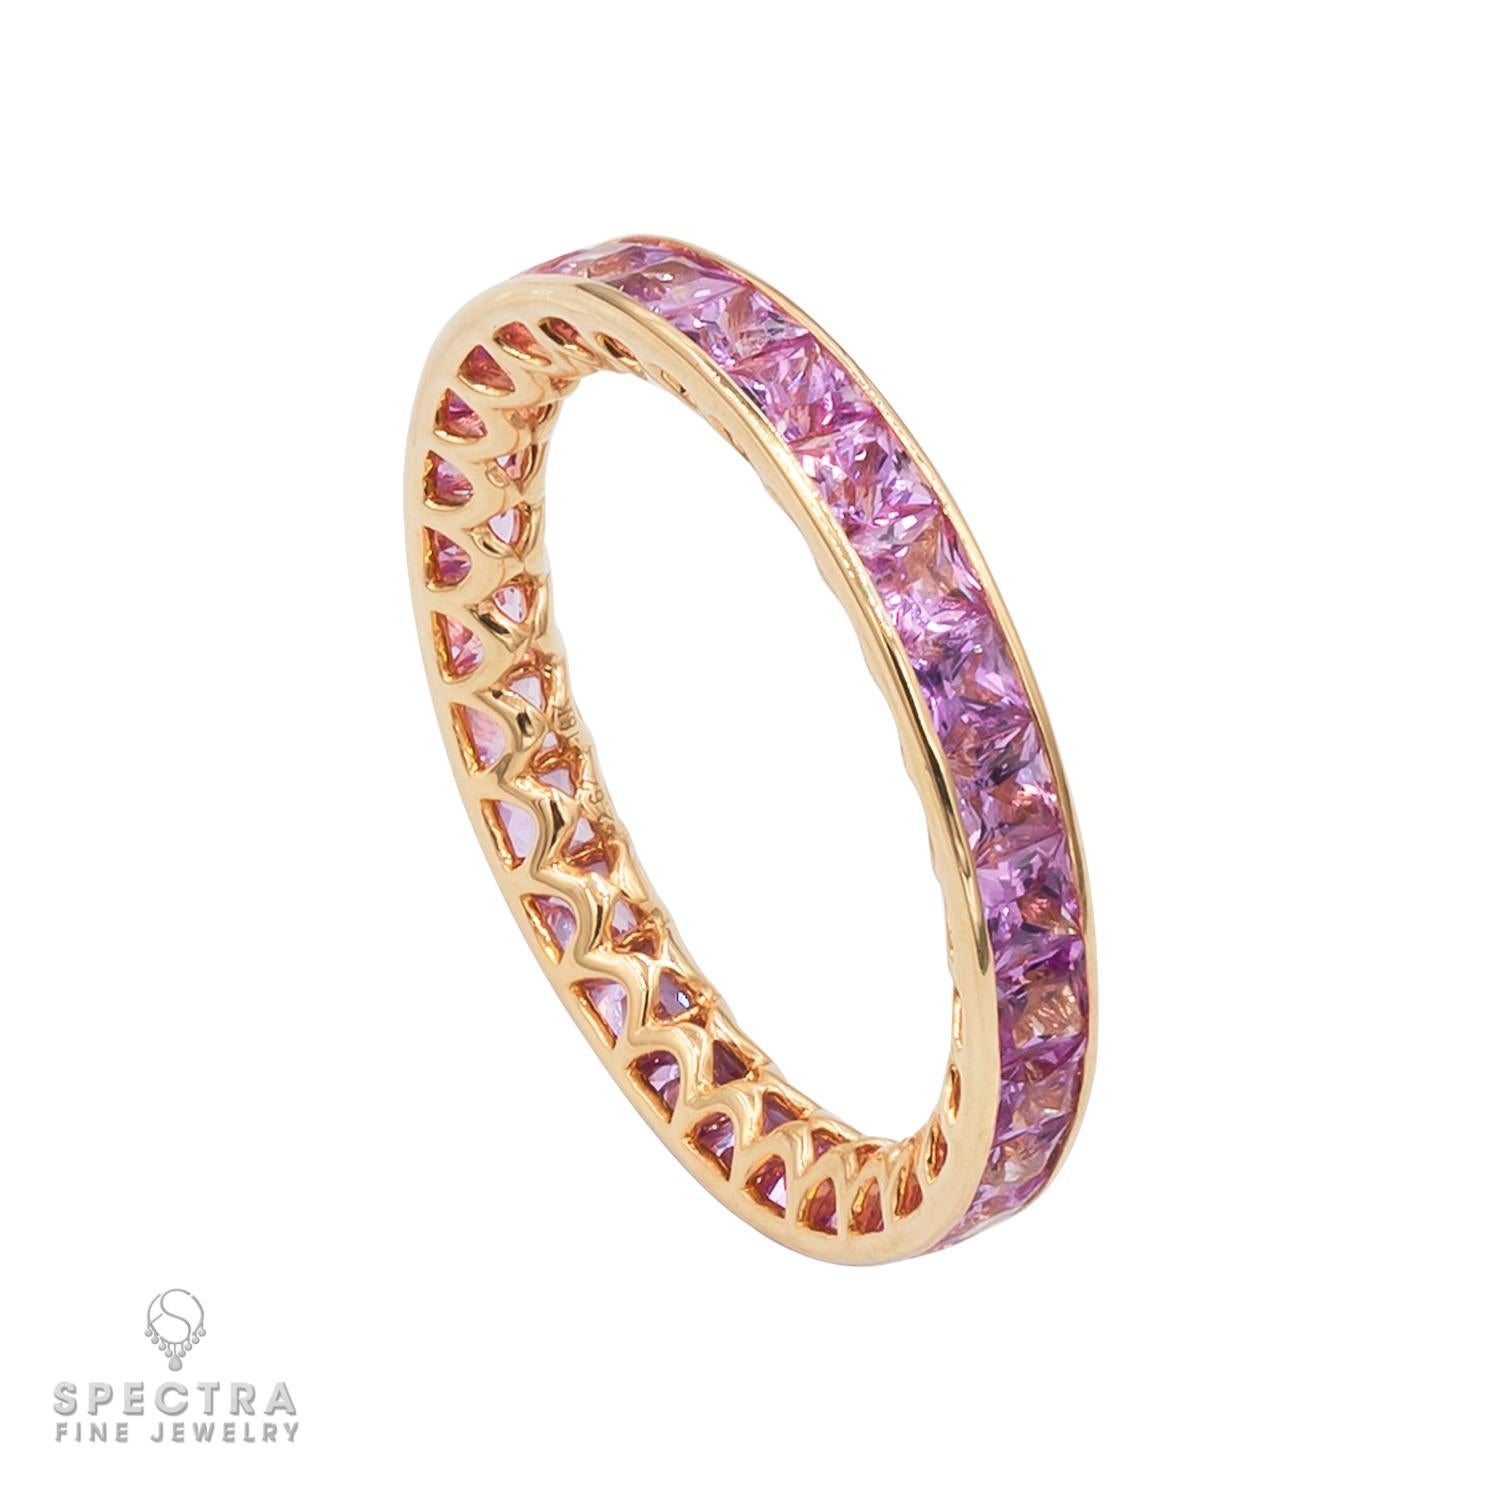 Pink sapphires are always spectacular for their captivating and unusual color. In this Pink Sapphire Eternity Band made by Spectra Fine Jewelry, the beautifully wrought openwork setting that peaks out from under the stones is just as stunning. From